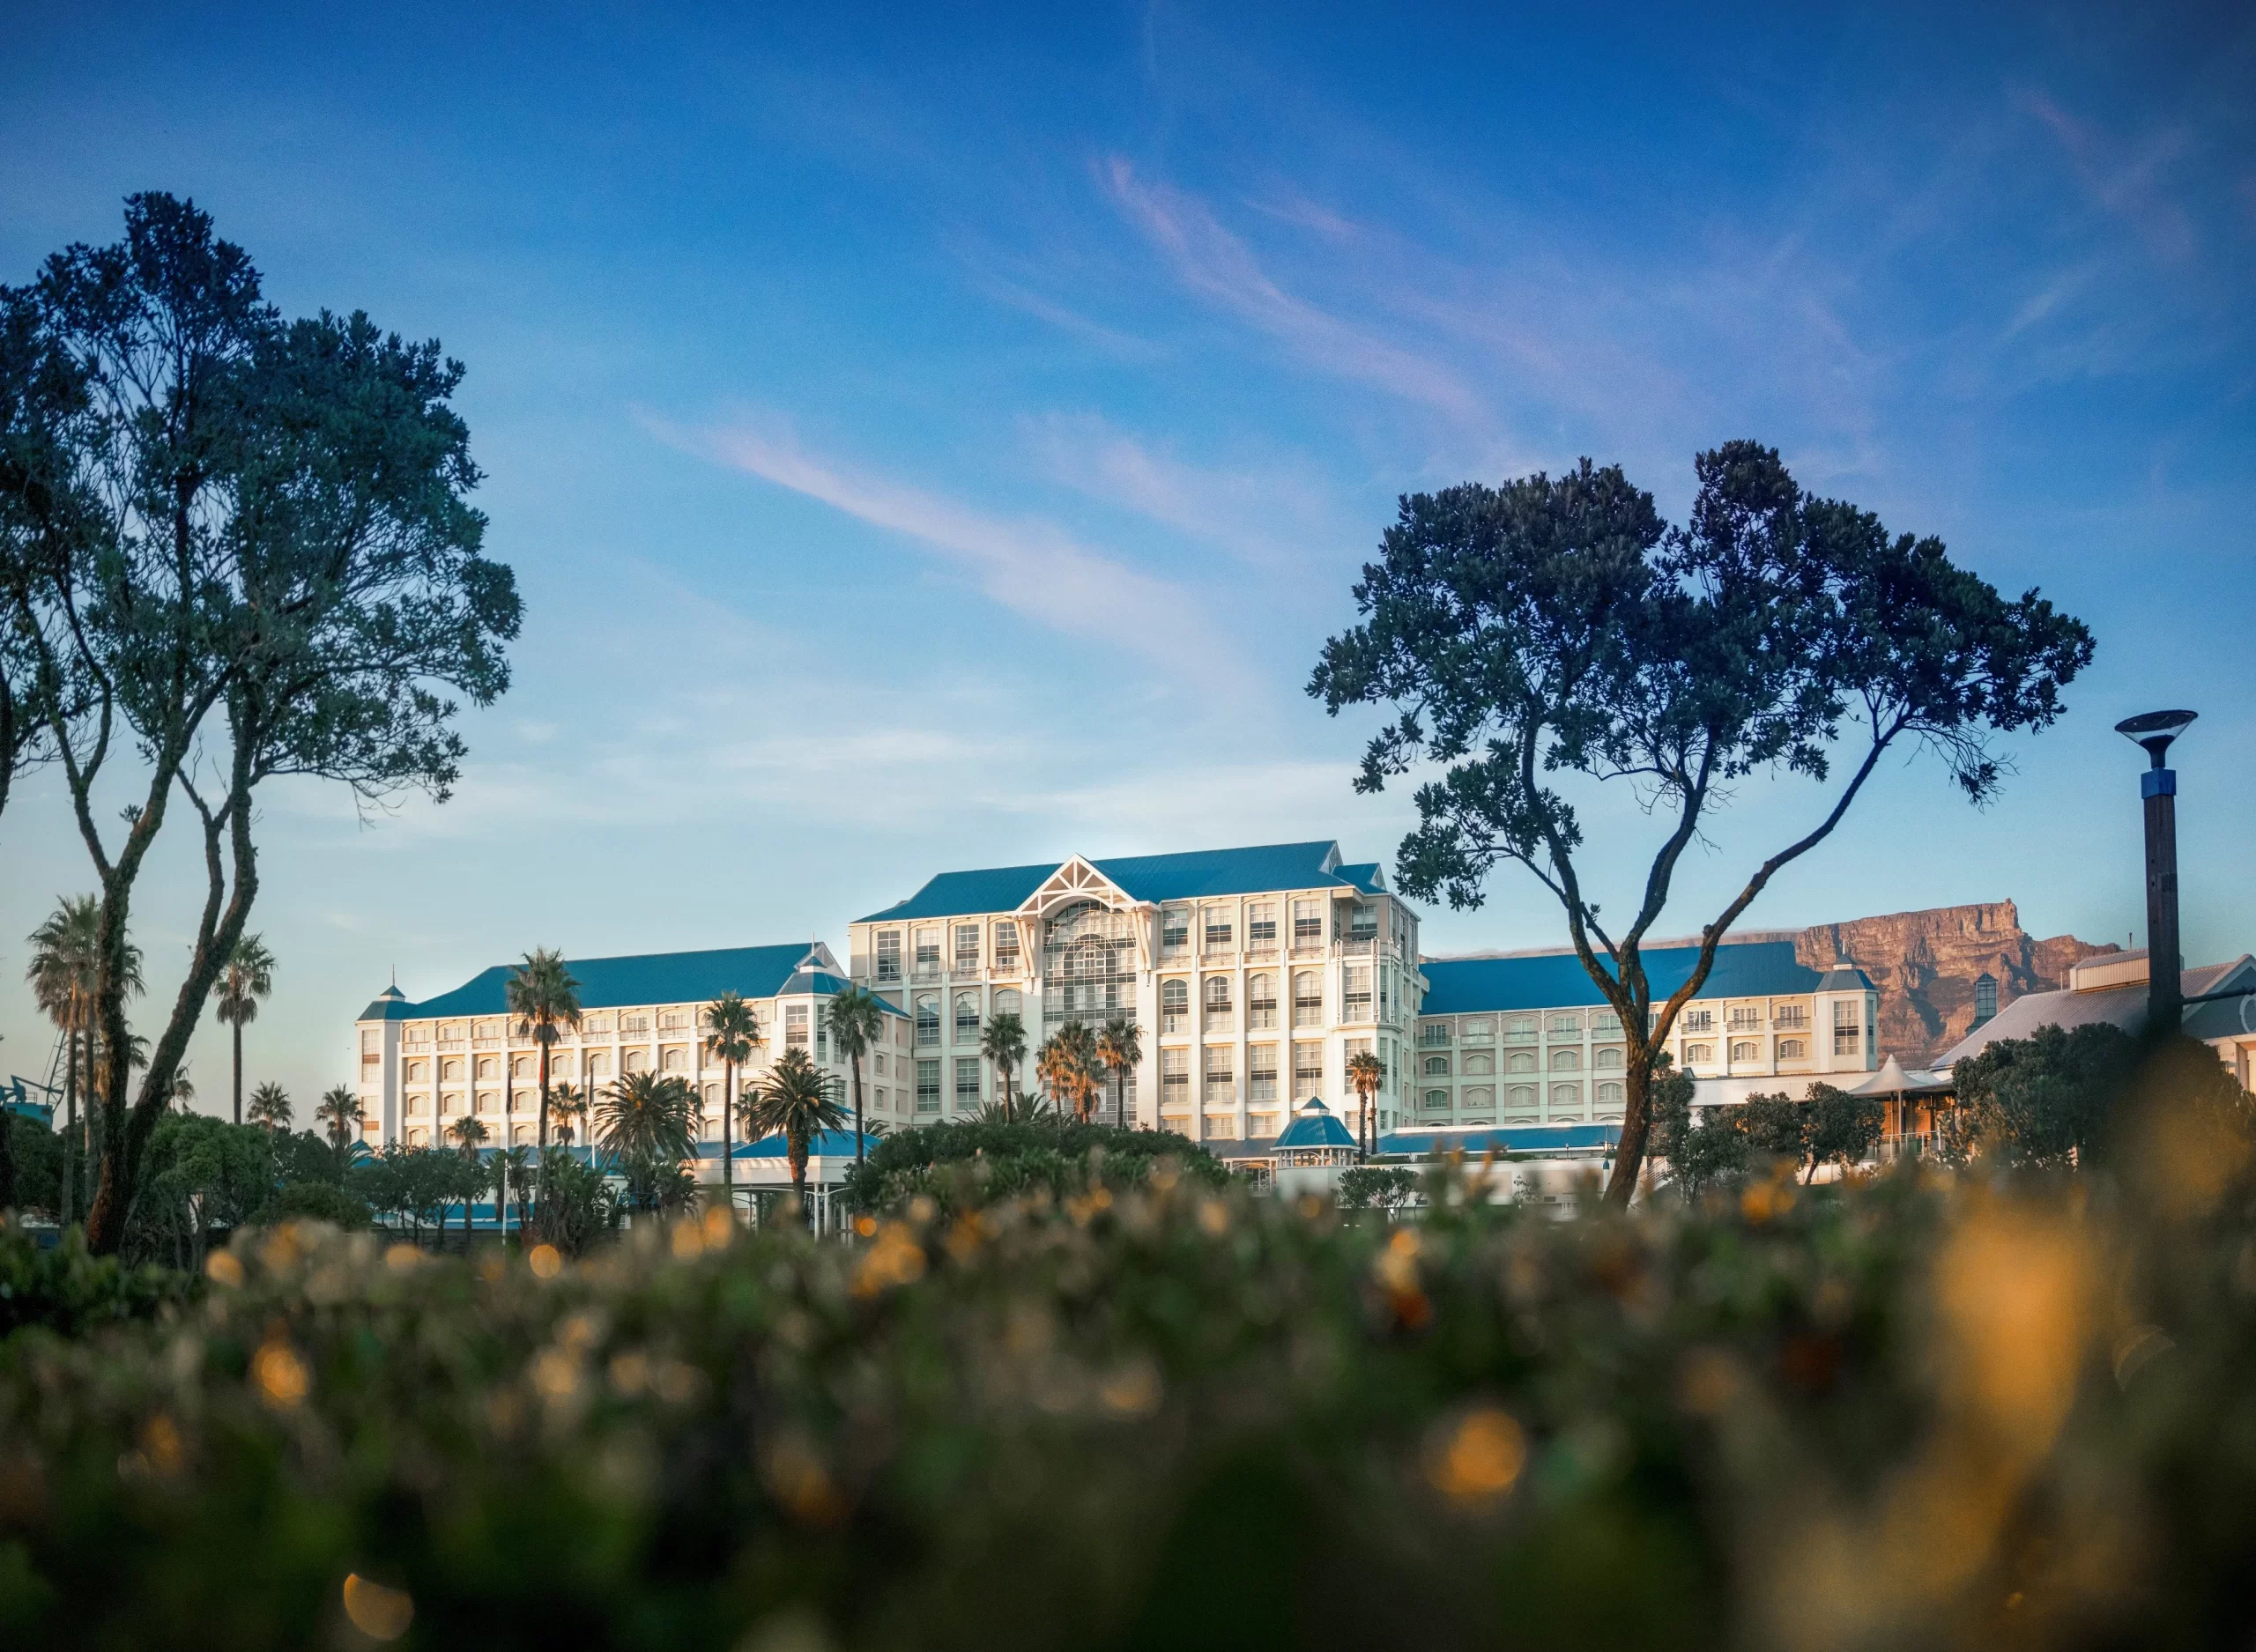 25 years of The Table Bay Hotel